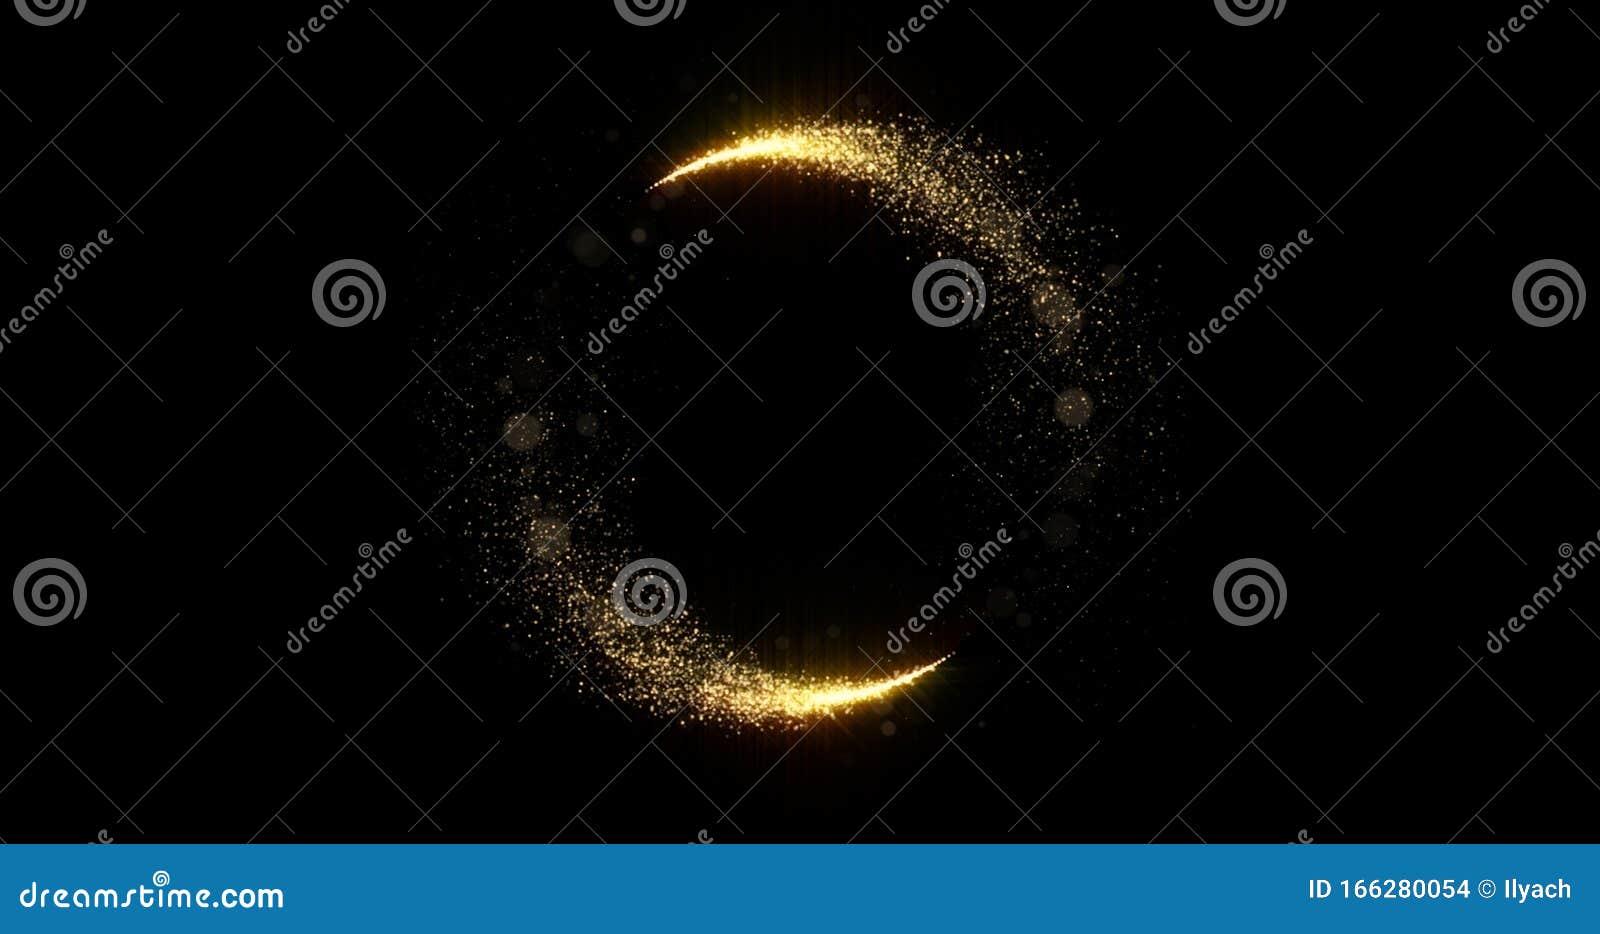 gold glitter circle trails, glittering light shine sparkles ring on black background. christmas and new year holiday magic glow